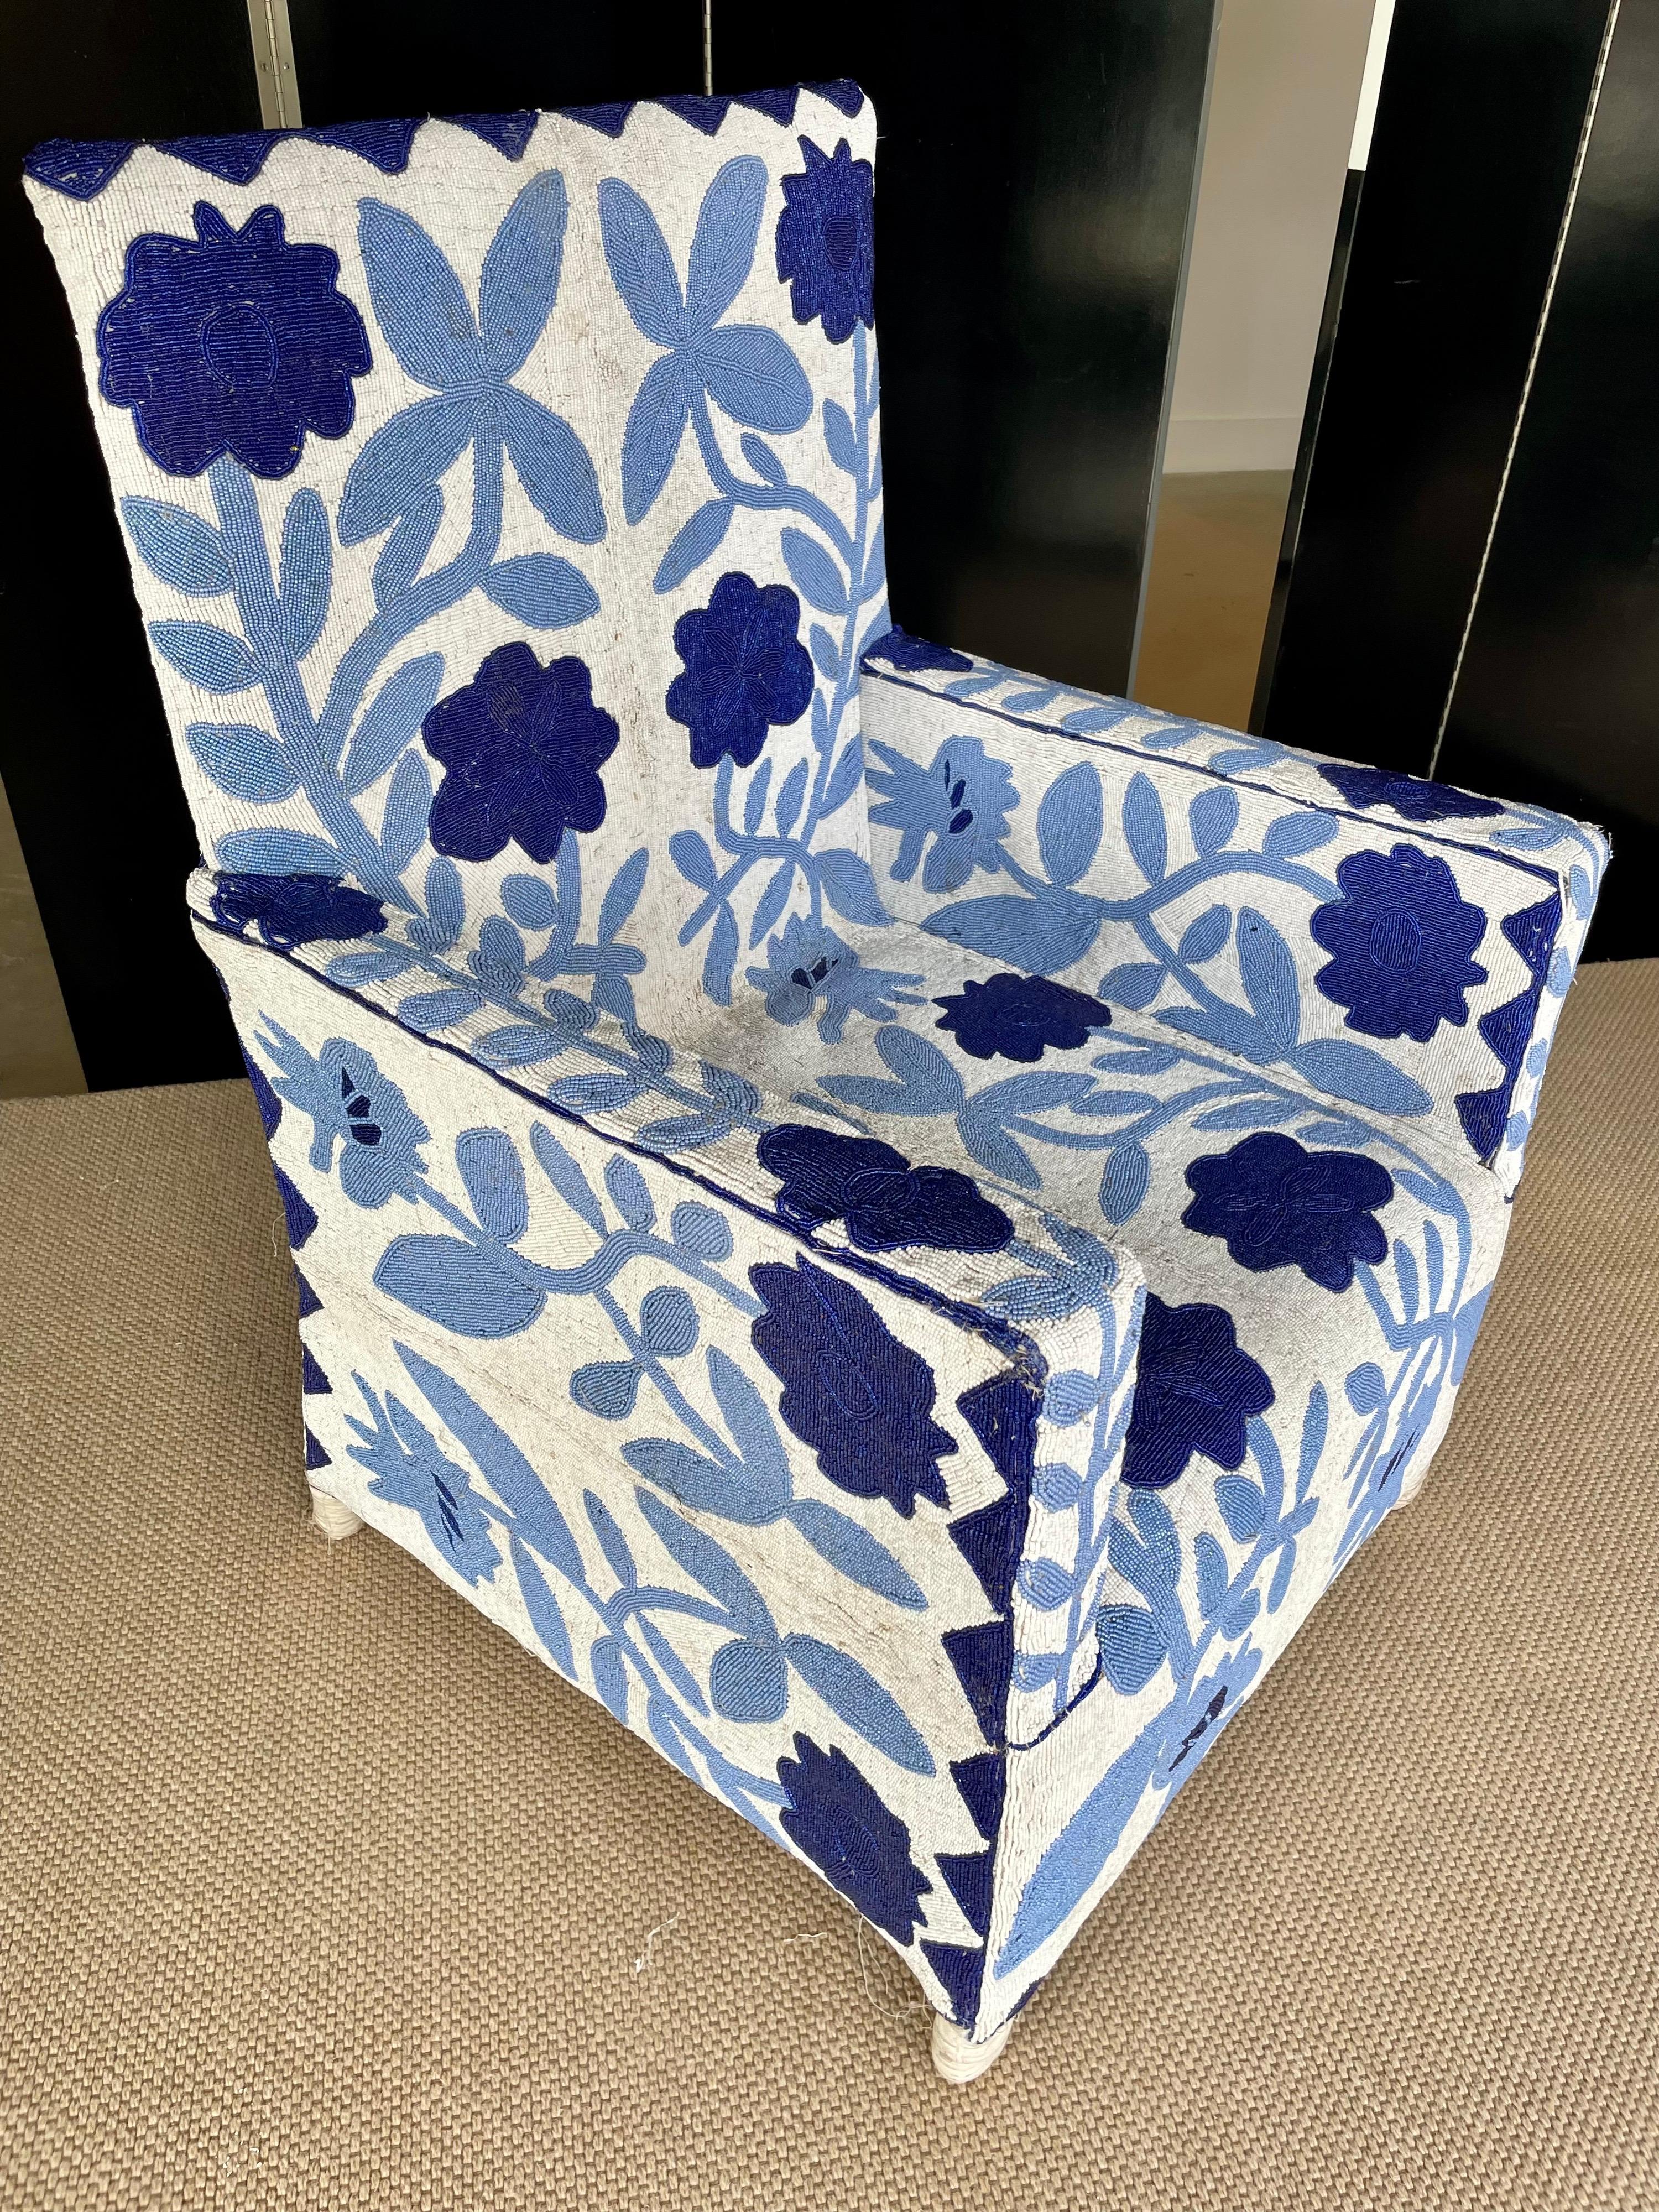 This truly exquisite hand beaded chair by the Yoruba Artisans of Nigeria, best representation of furniture as art. Adorned with Yves Klein Blue and white beads, reminiscent the Marimekko florals design. And don't be shy to sit on them, because they